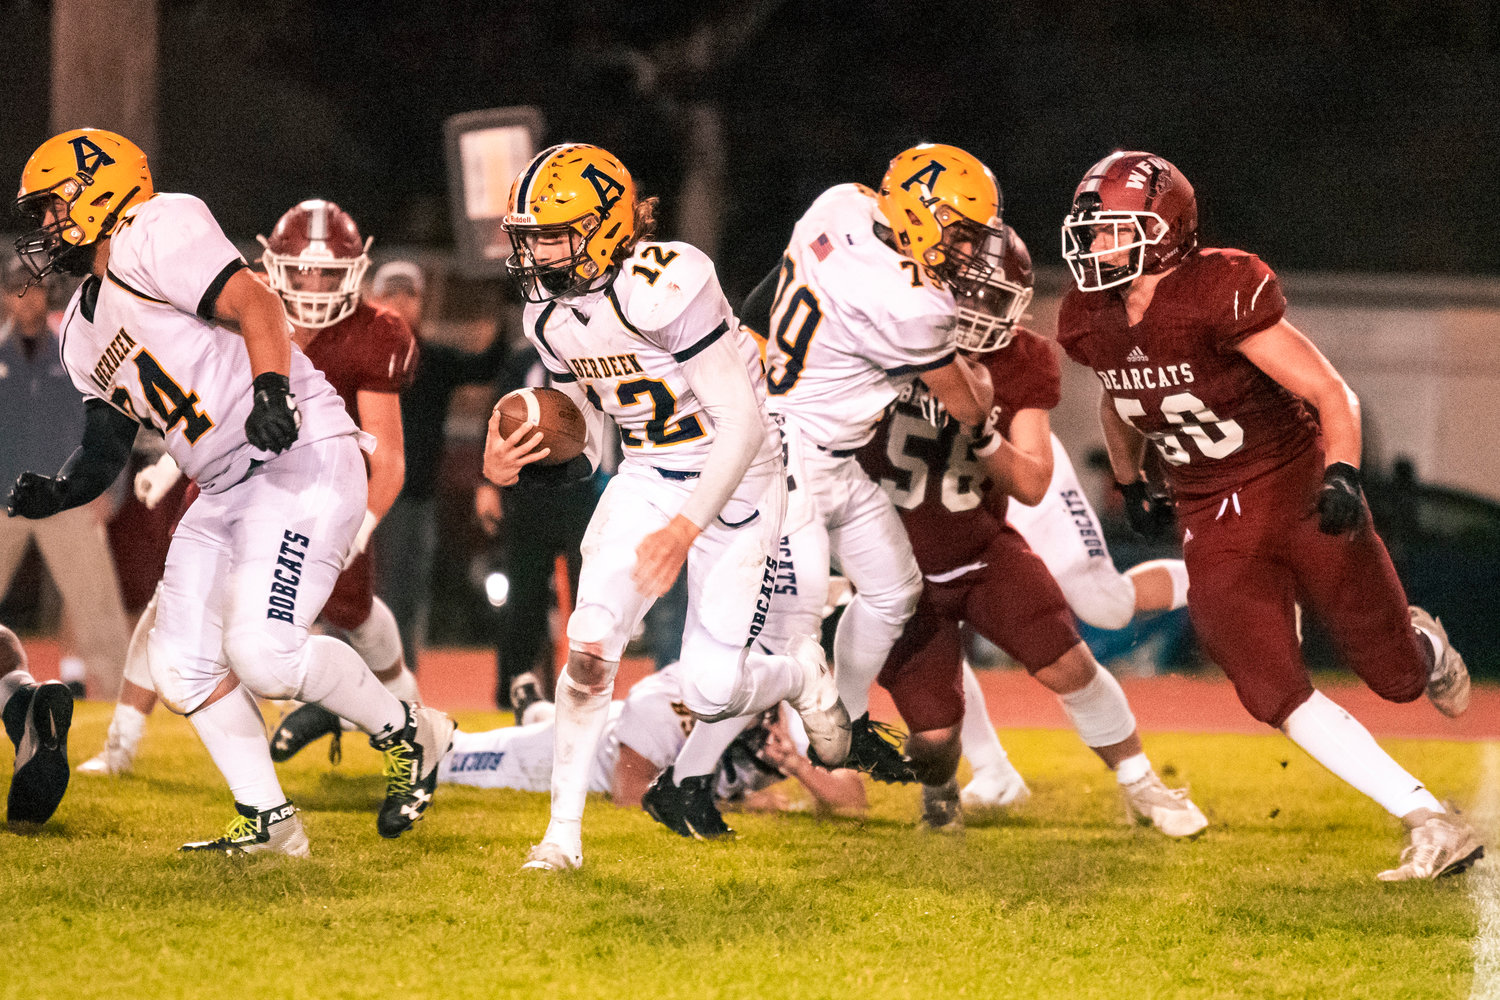 Aberdeen’s Jakob Bowers (12) runs with the football Friday night during a game against W.F. West.